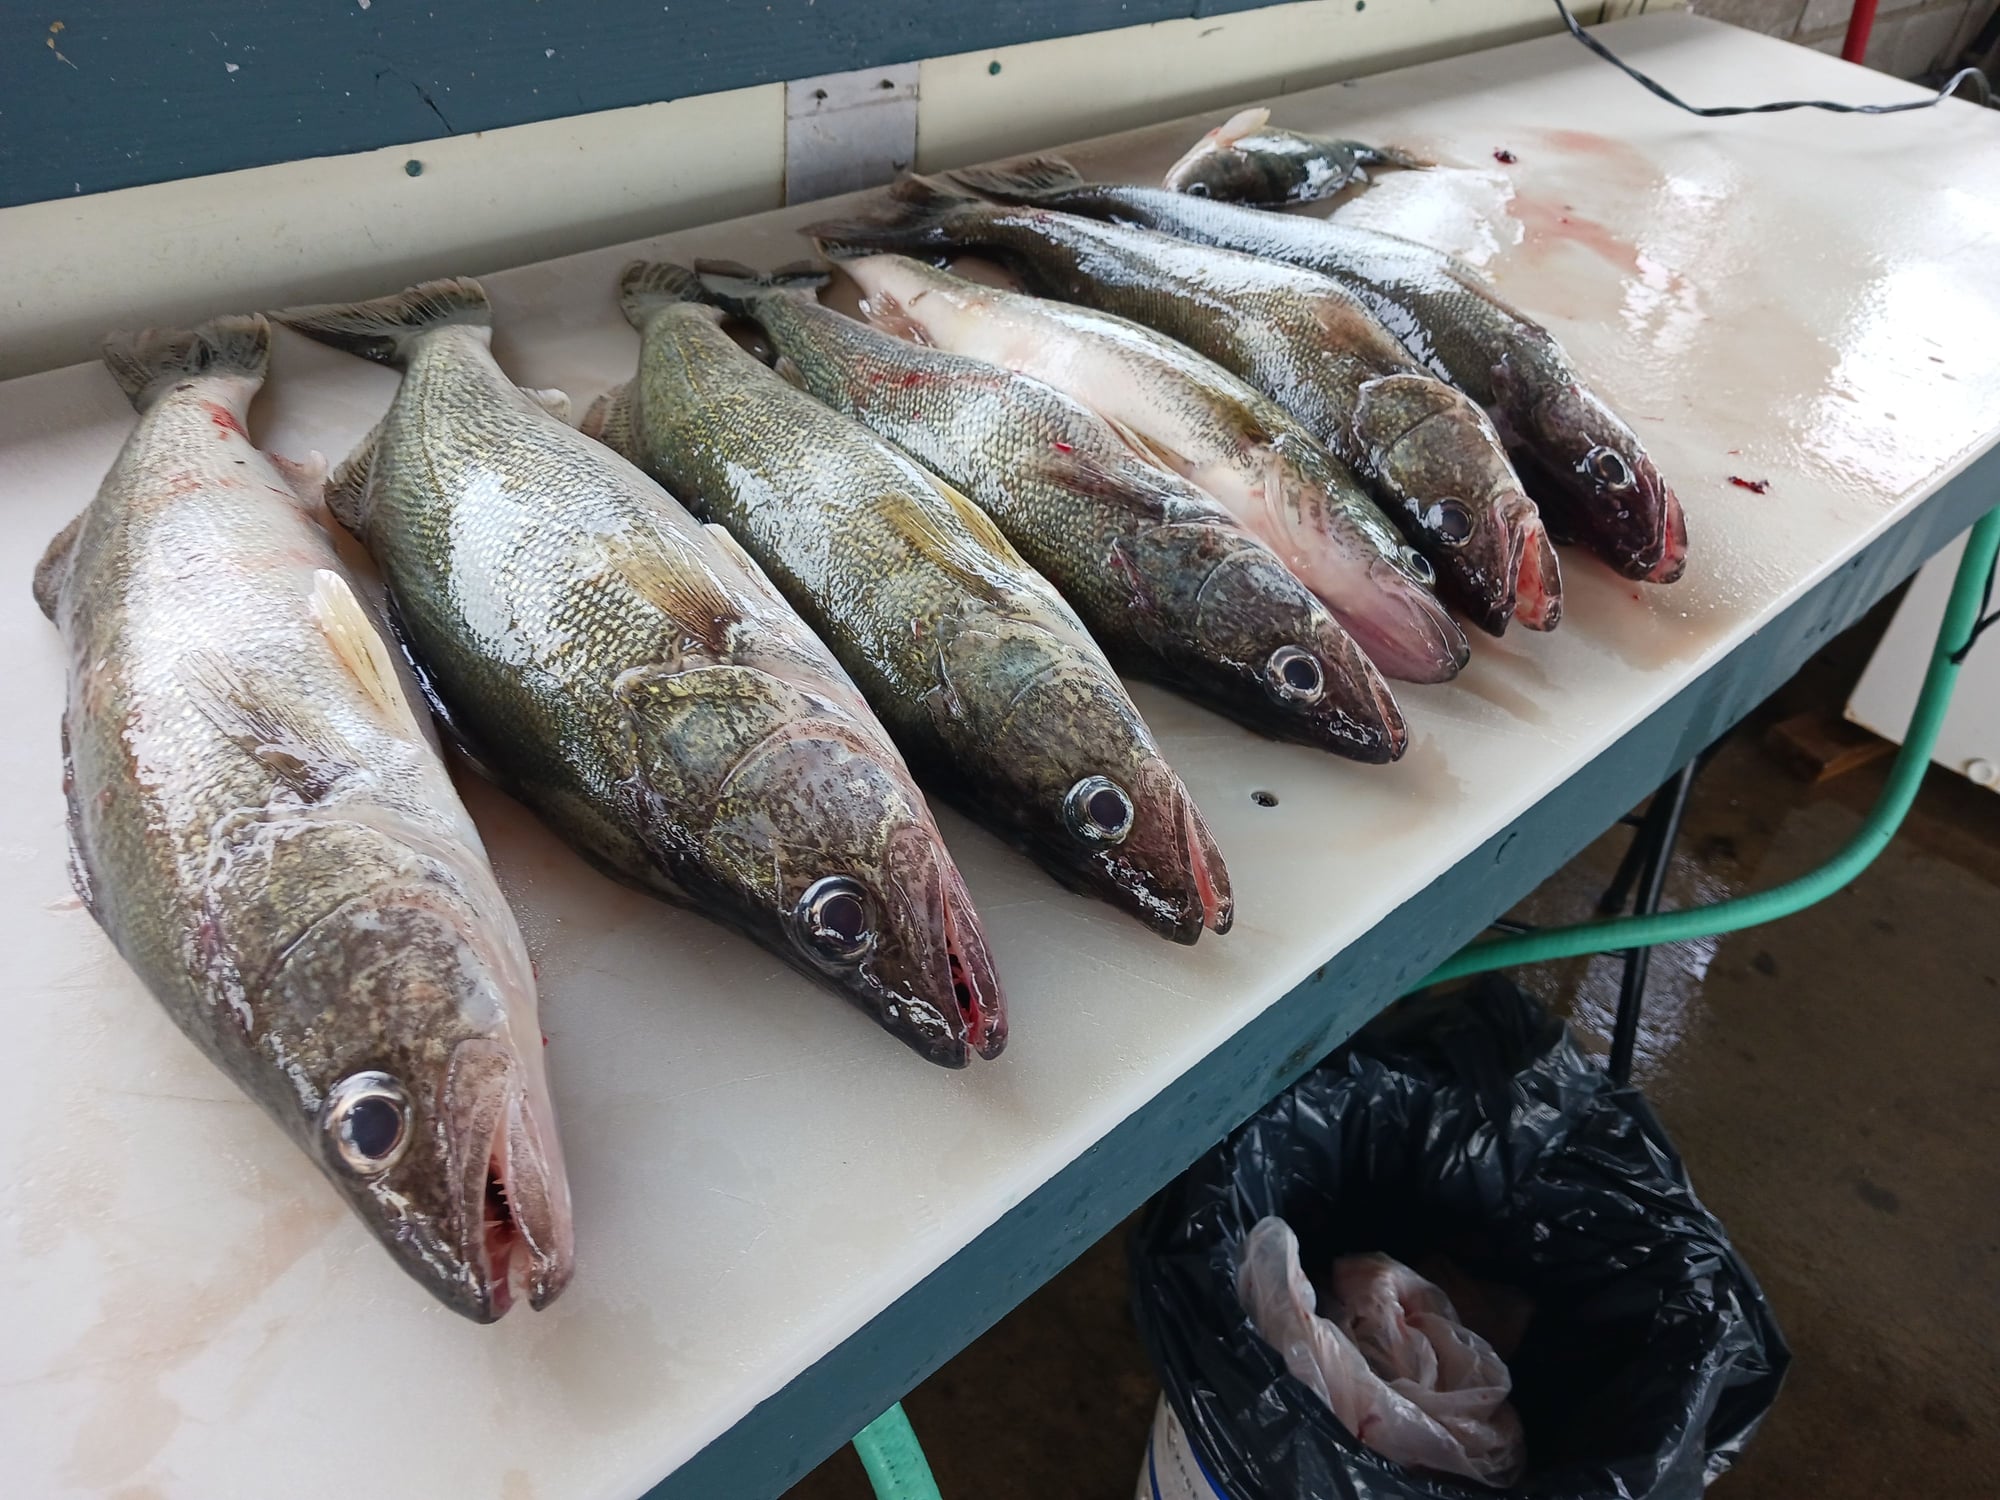 Western Lake Erie fishing report. - Page 124 - The Hull Truth - Boating and  Fishing Forum